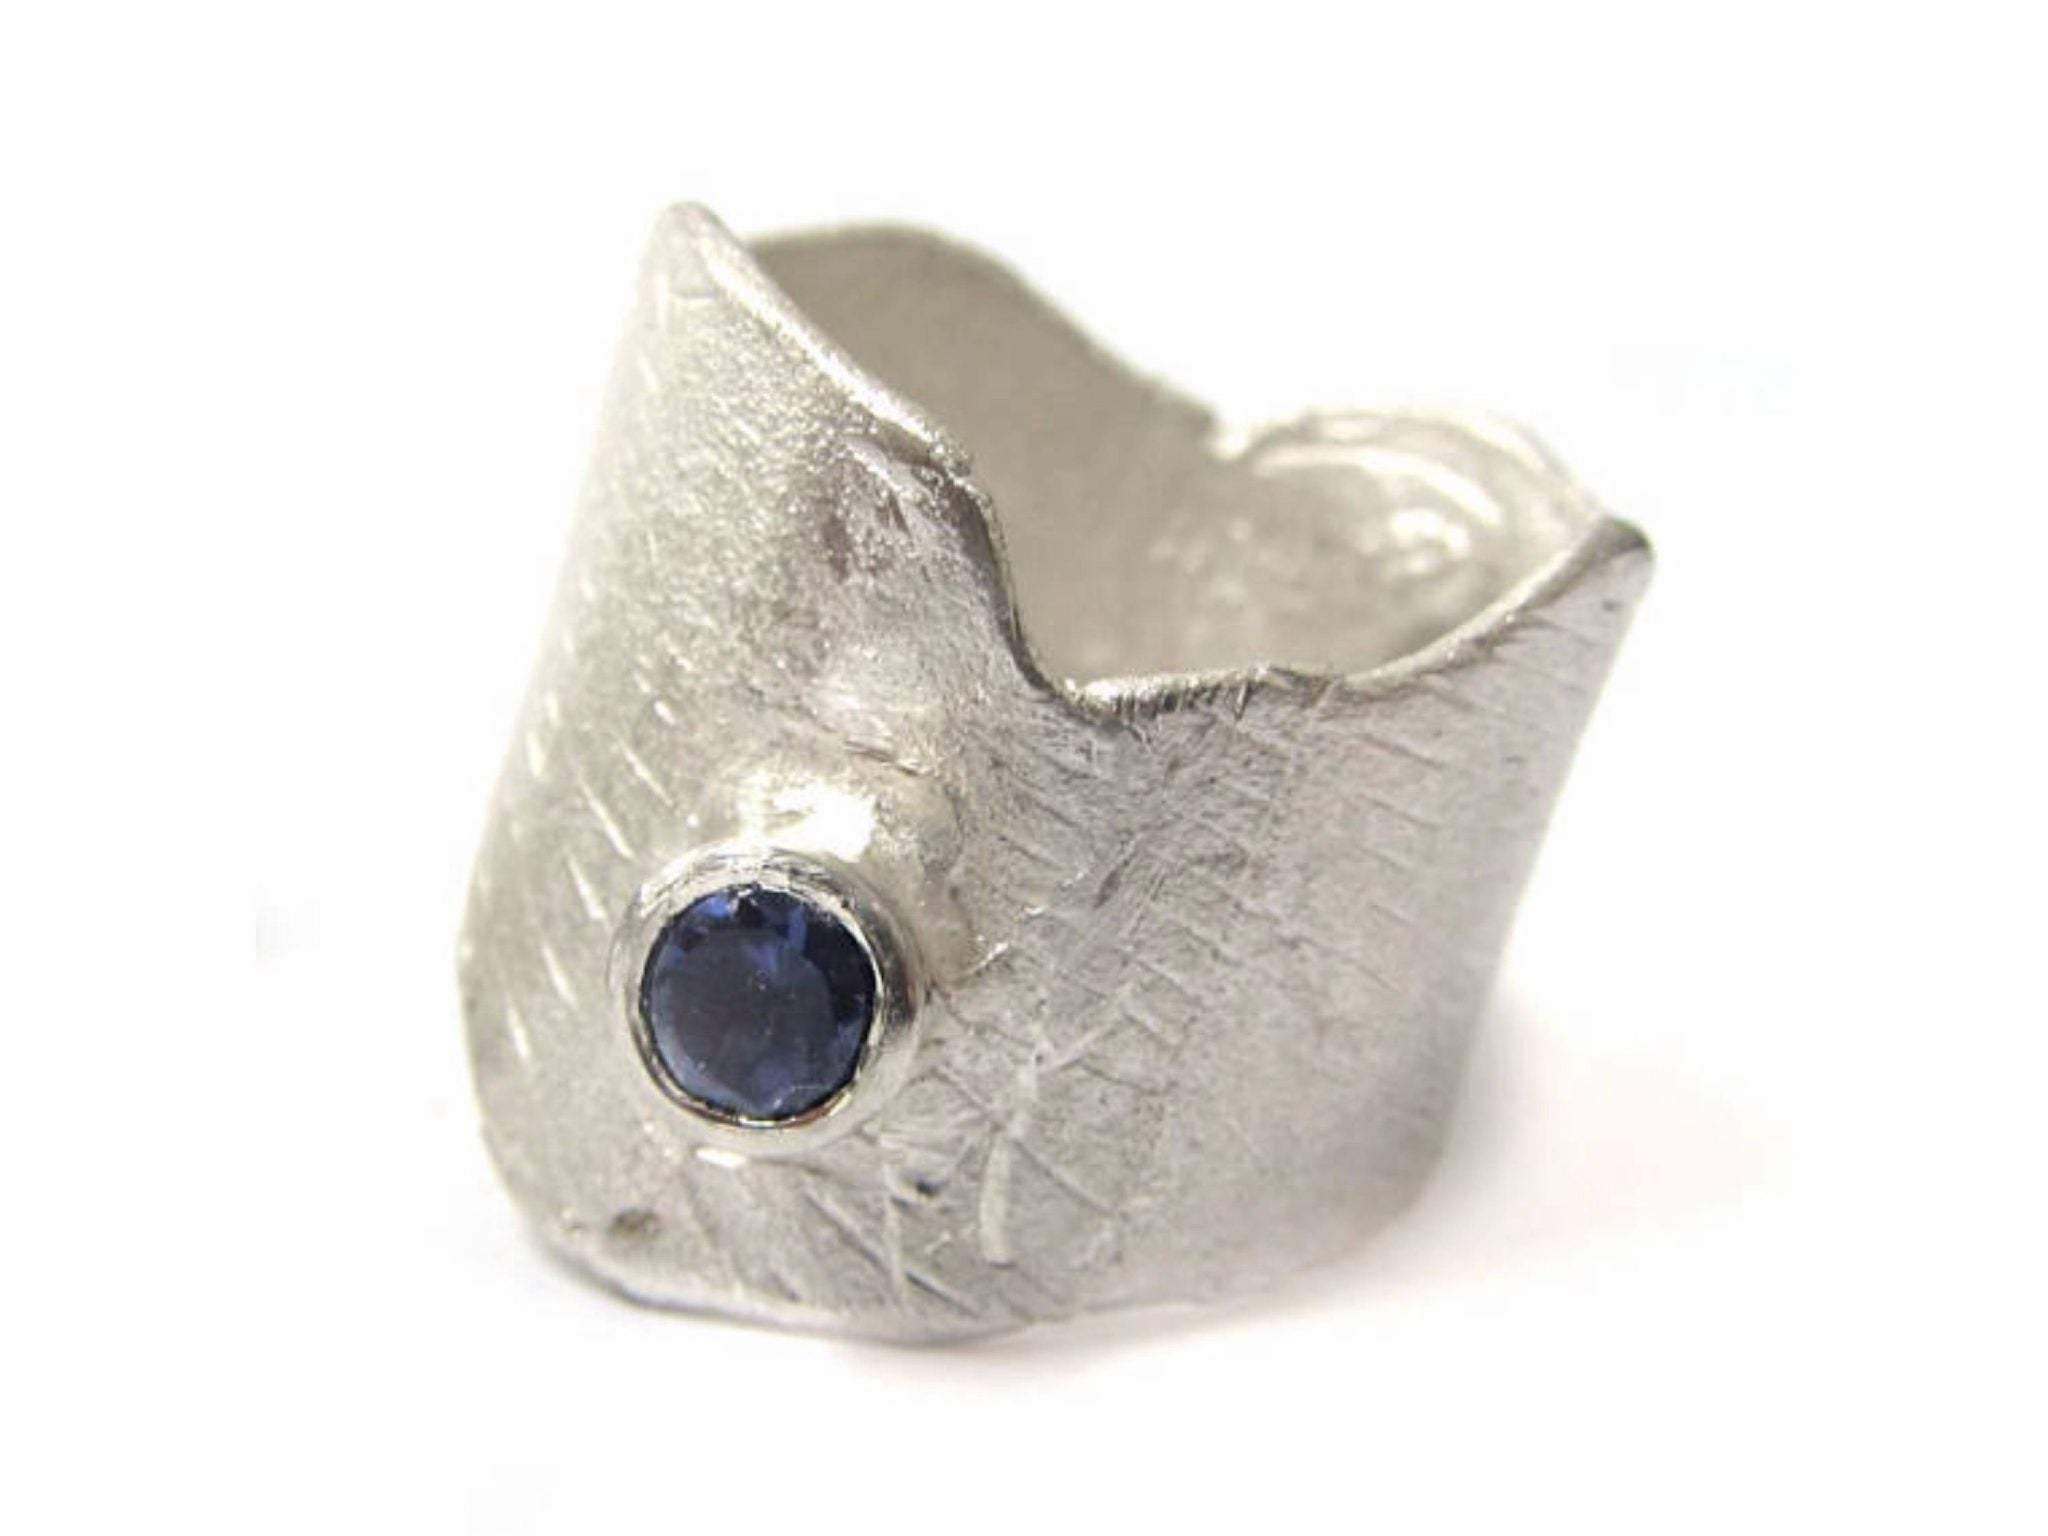 Sculptural Silver Ring with a blue Iolite gemstone - large statement ring, sterling silver organic ring